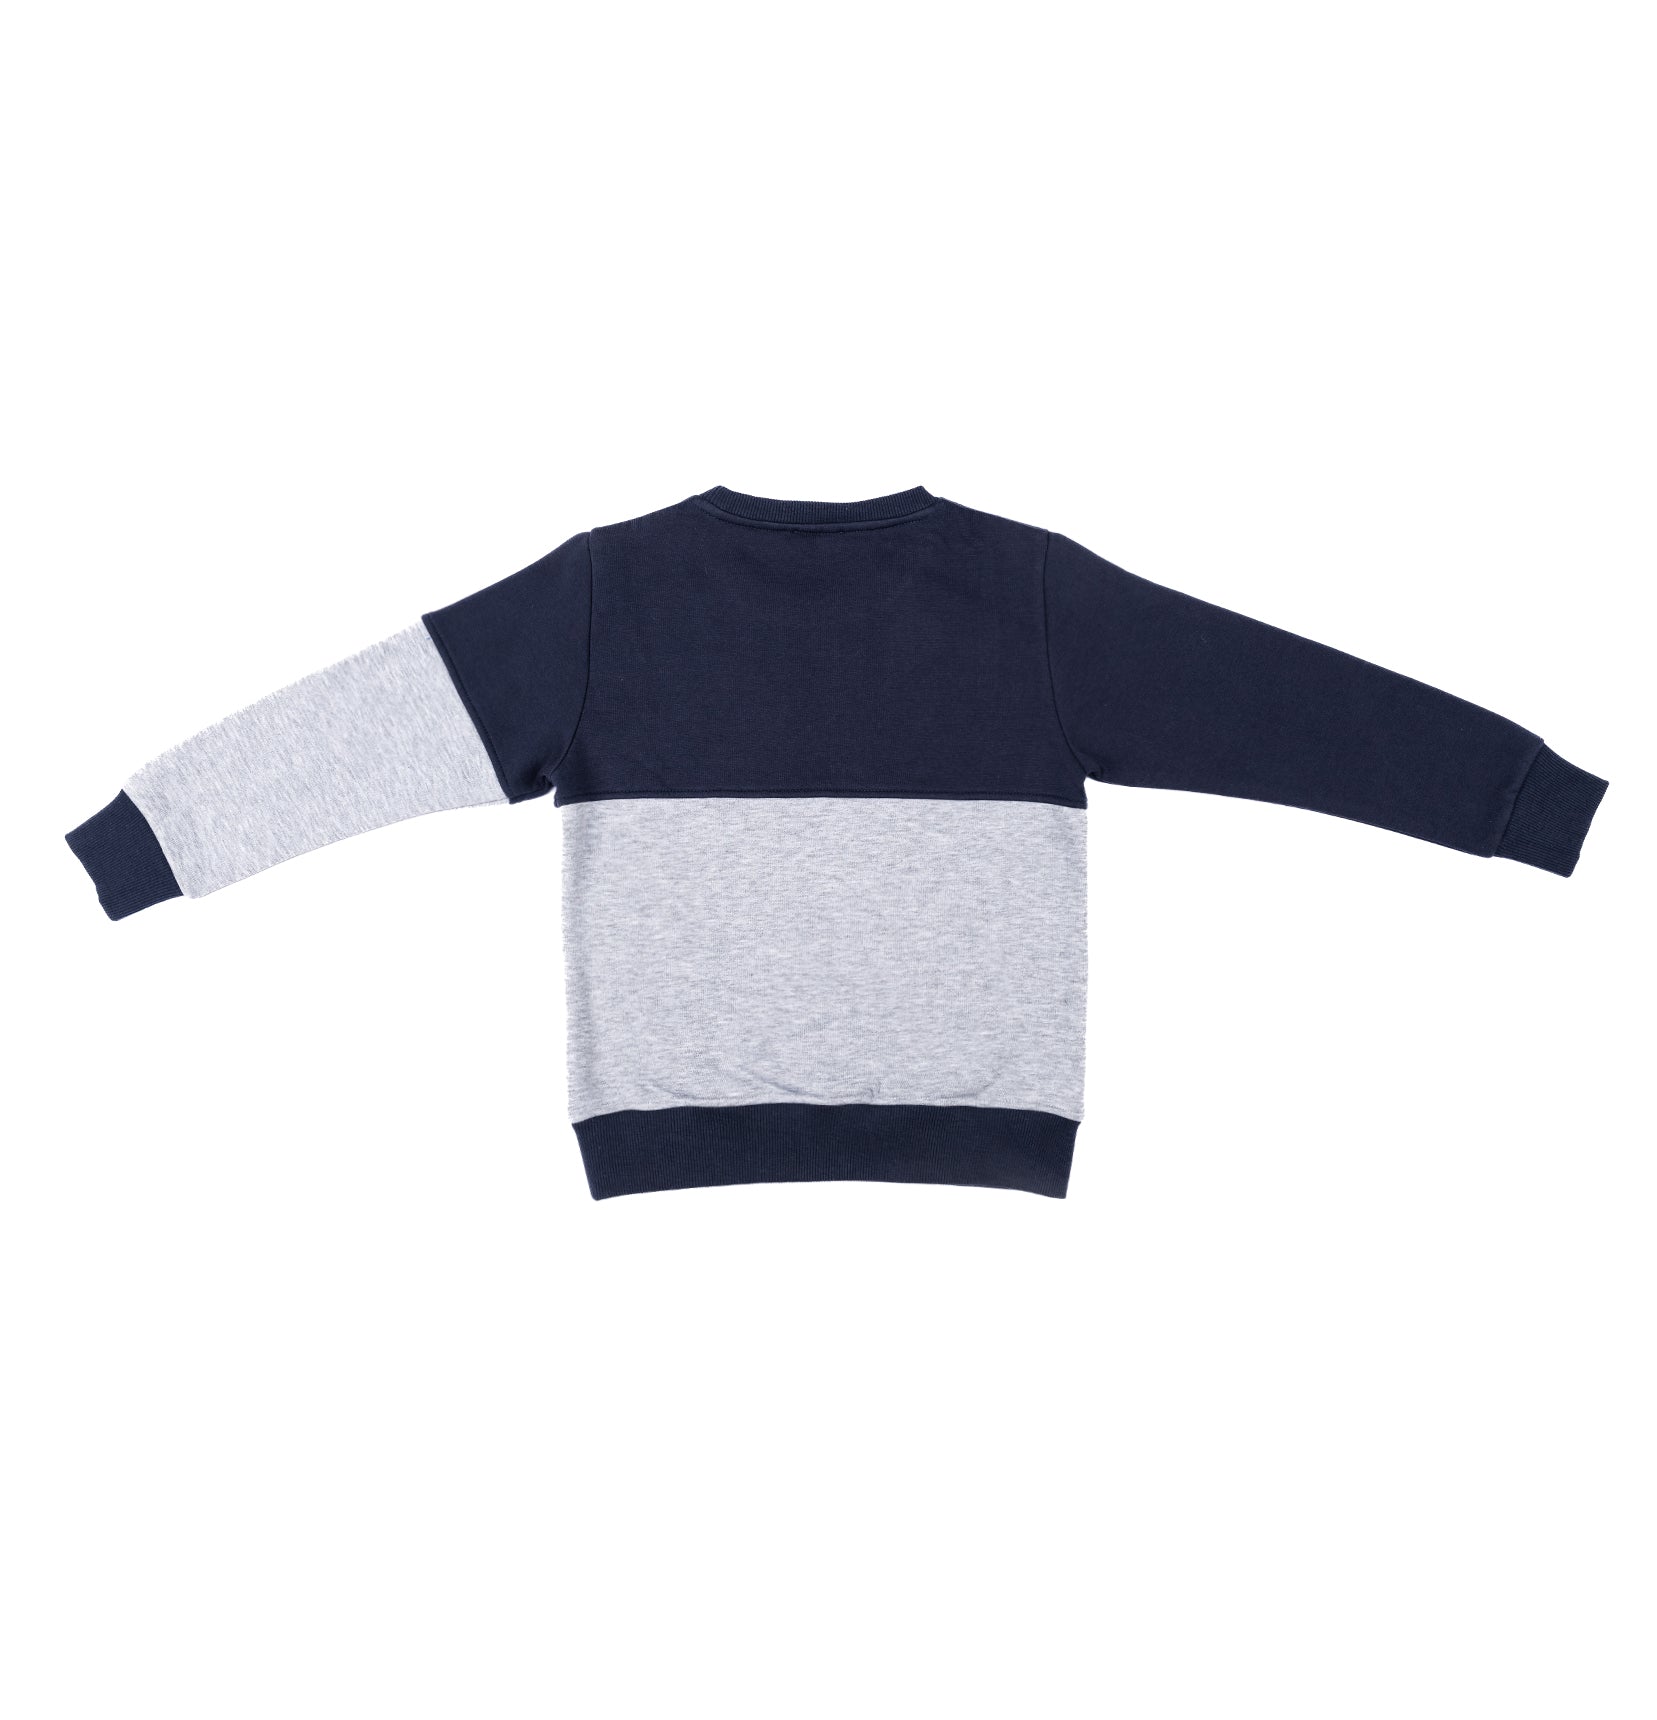 Unique colored sweat shirt for boys by Pompelo